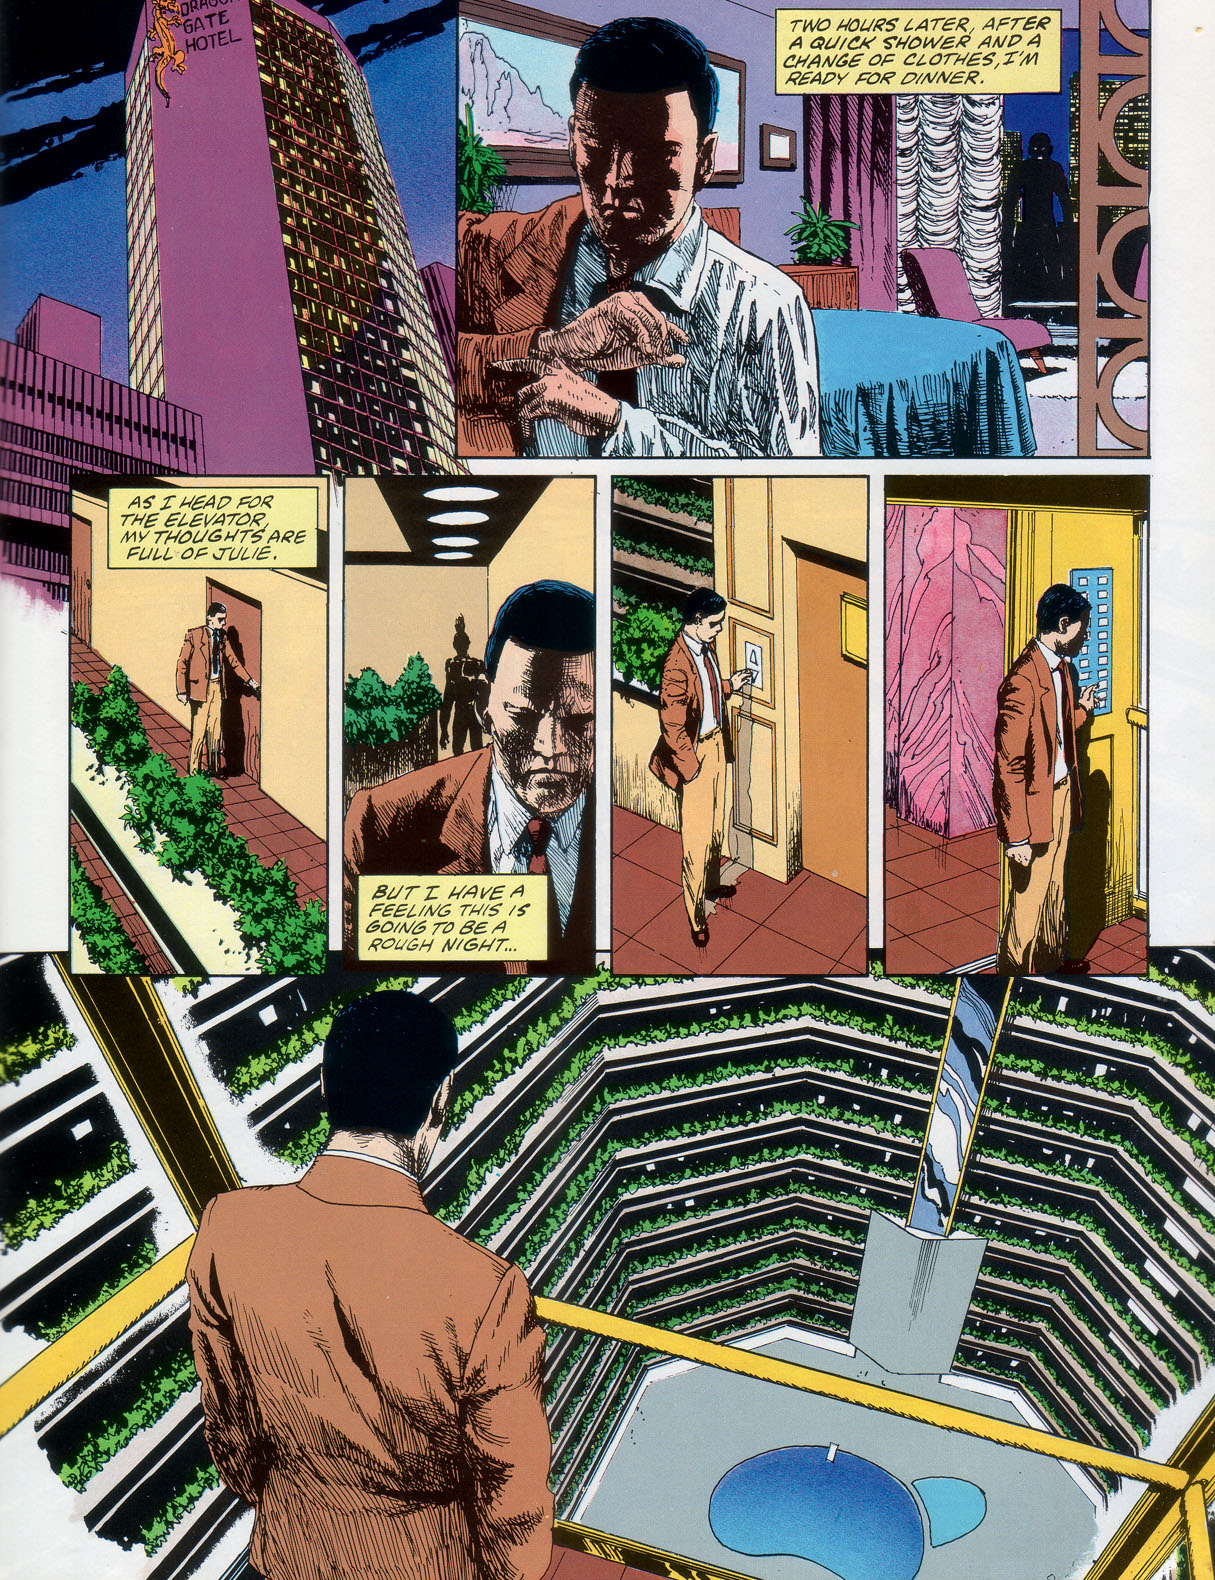 Marvel Graphic Novel issue 57 - Rick Mason - The Agent - Page 13